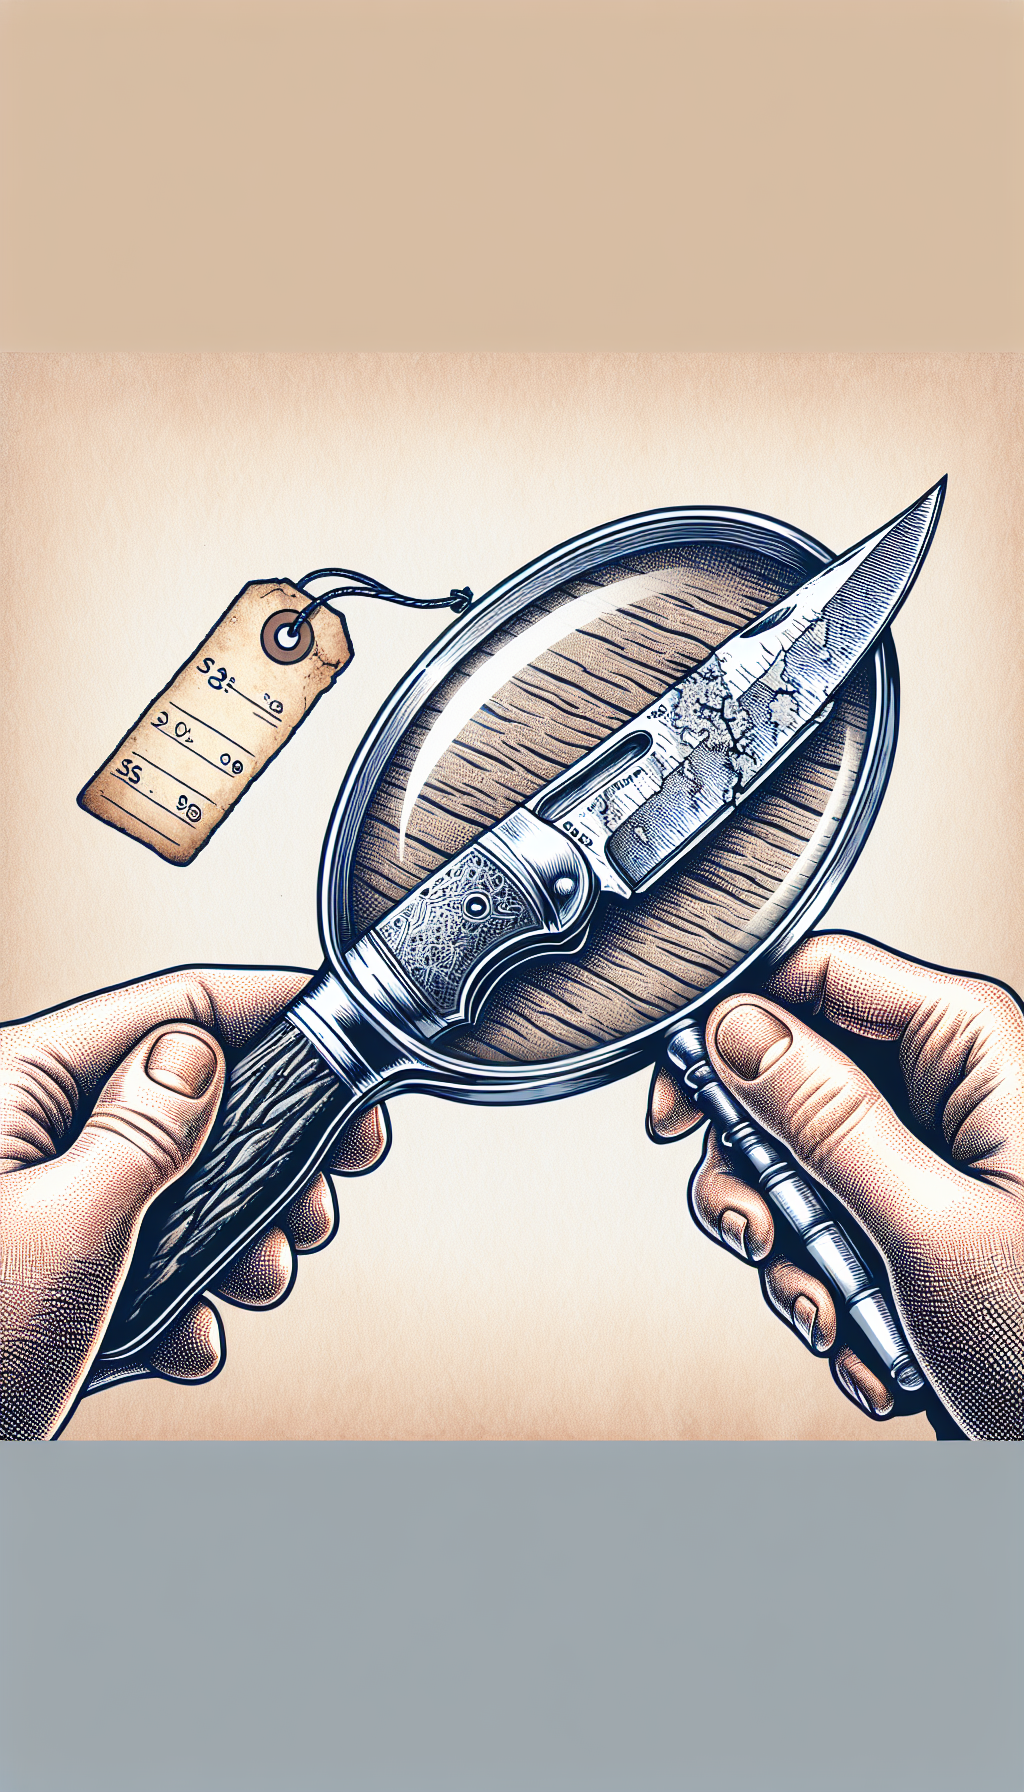 An intricately detailed illustration features a magnifying glass held above a vintage Case knife, juxtaposing a pristine blade against a rusted one. Texture contrasts illustrate quality, while a faded price tag dangles from the handle, whispering of its high value. Background styles oscillate between crisp line art for the knife and watercolor blurs for a timeless aesthetic.